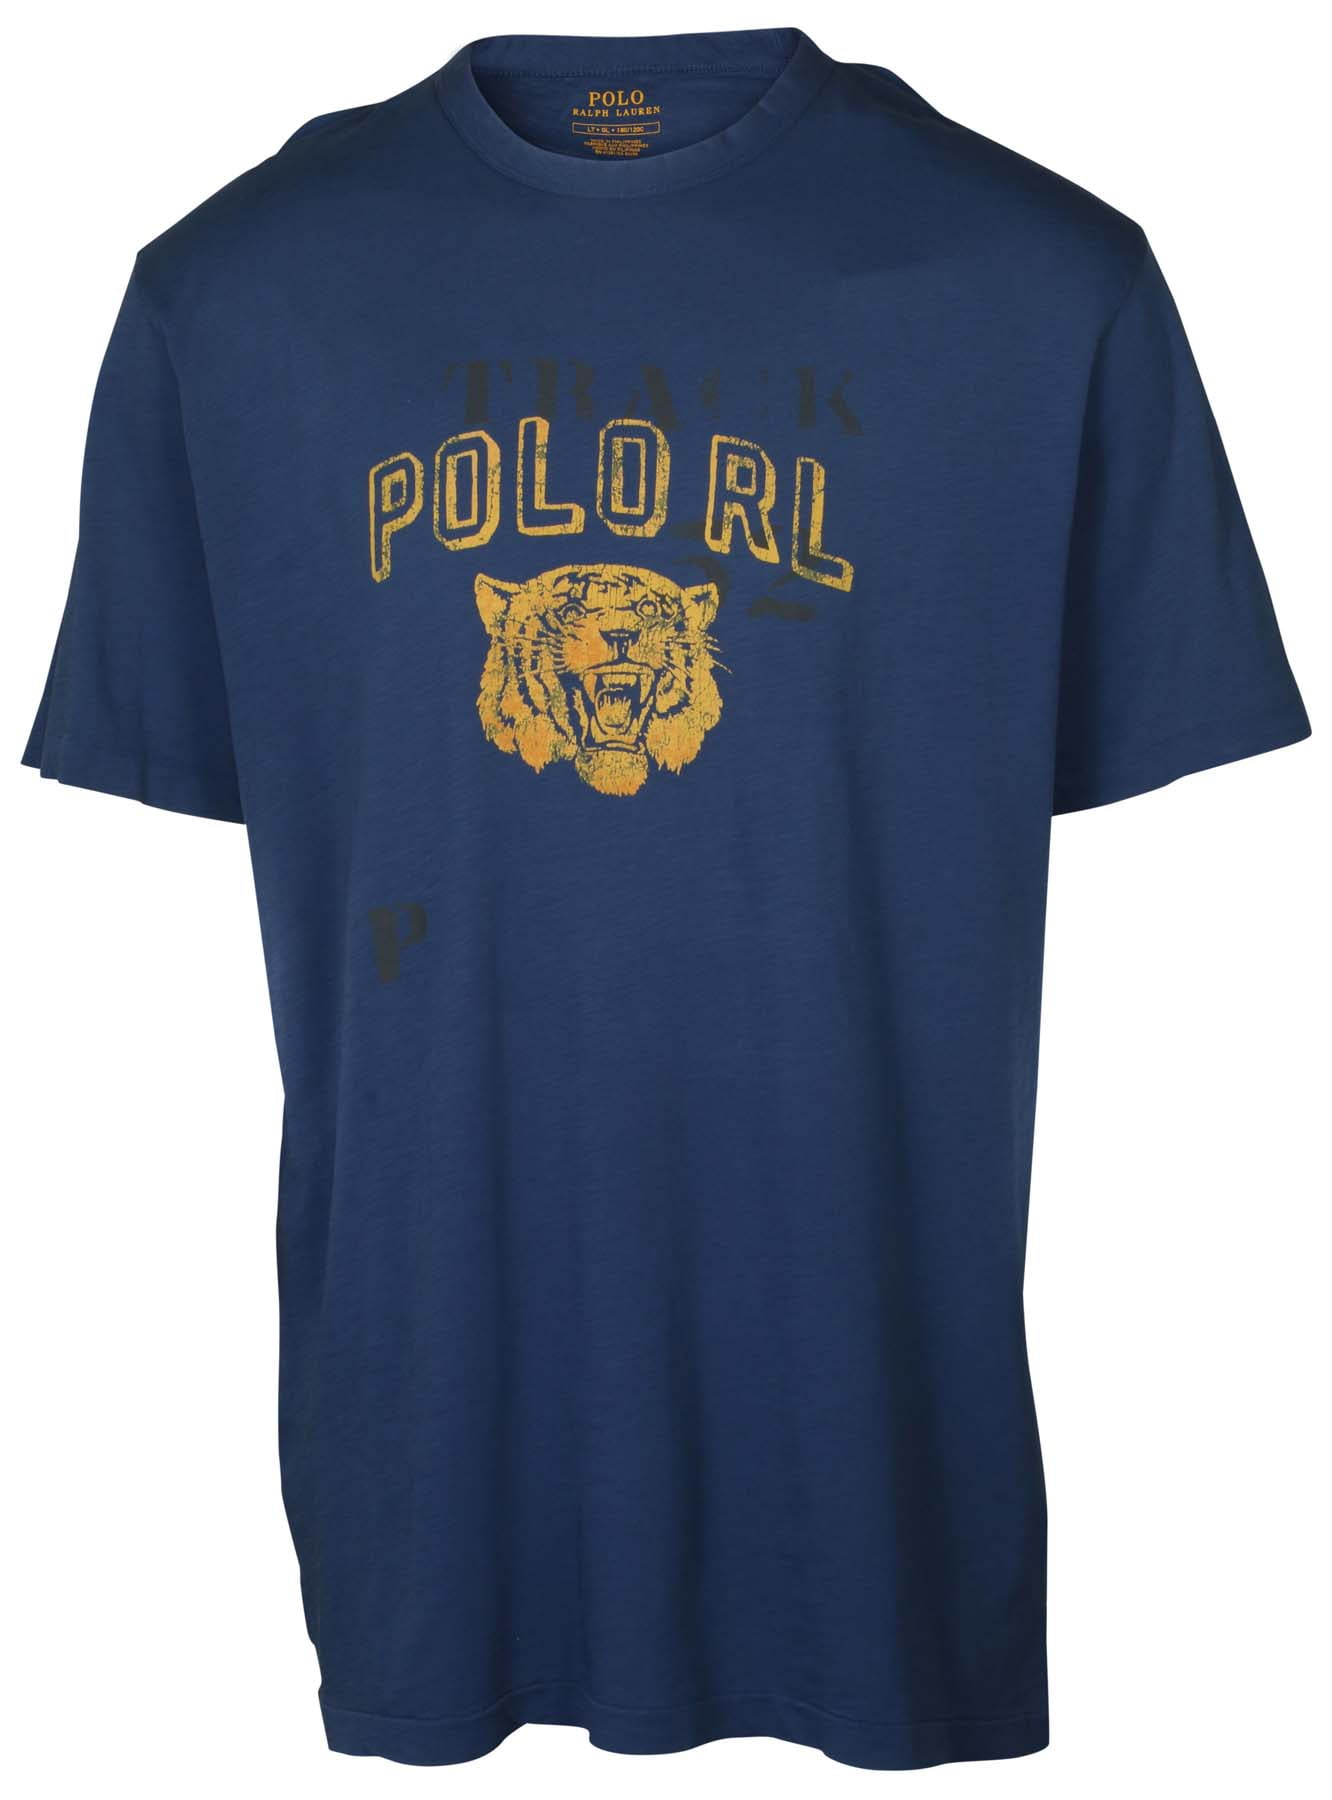 Polo Ralph Lauren - Polo RL Men's Big and Tall Gym Tiger Graphic T